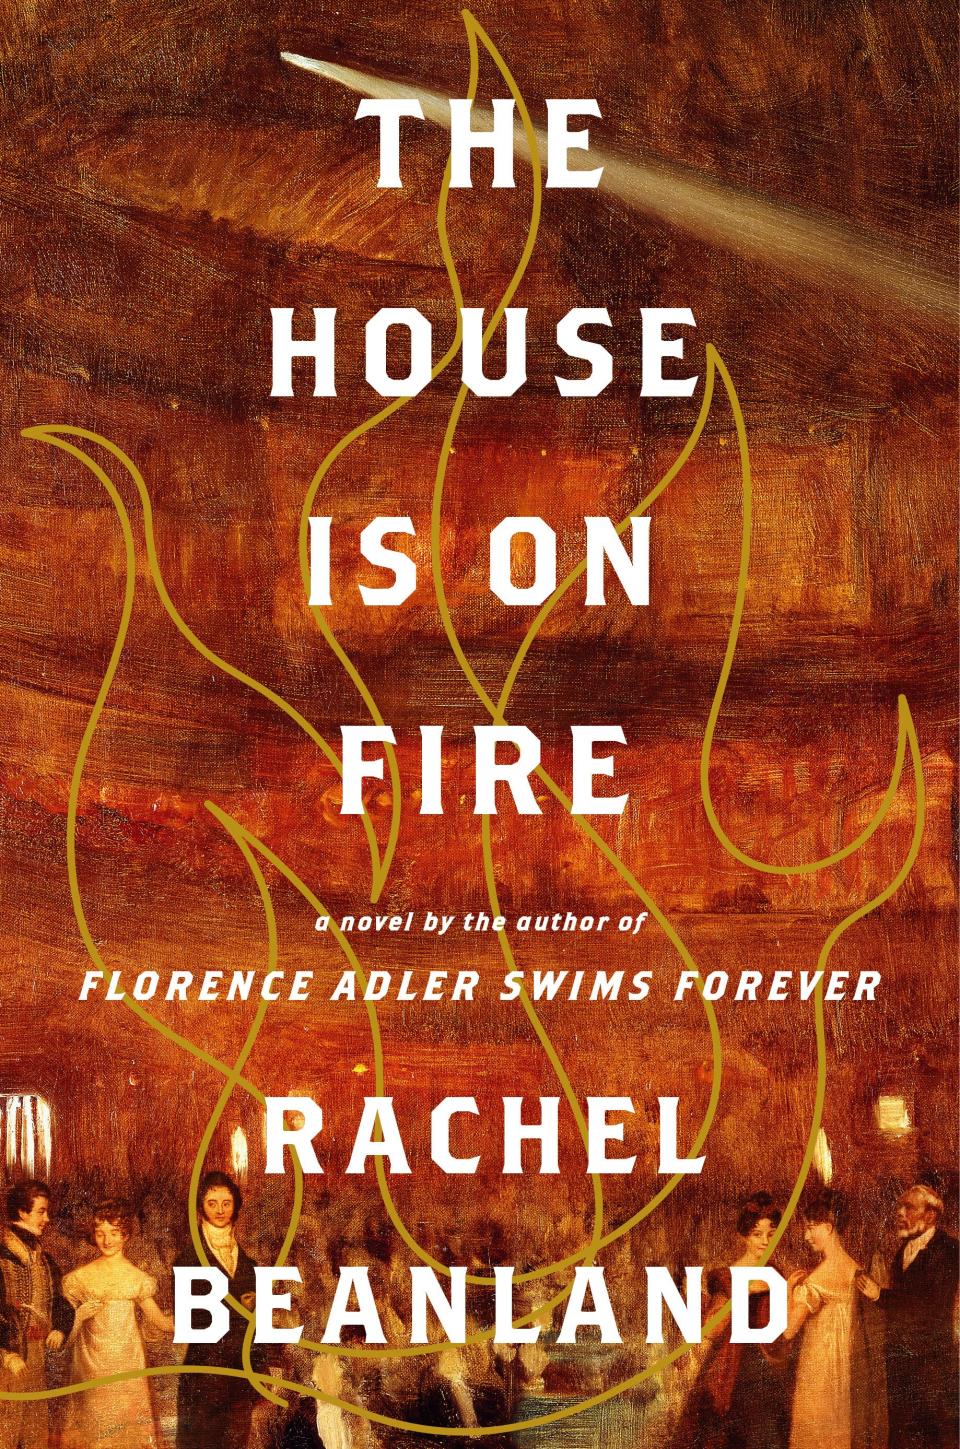 The House is on Fire retells the story of an 1811 theater fire in Richmond, Va.